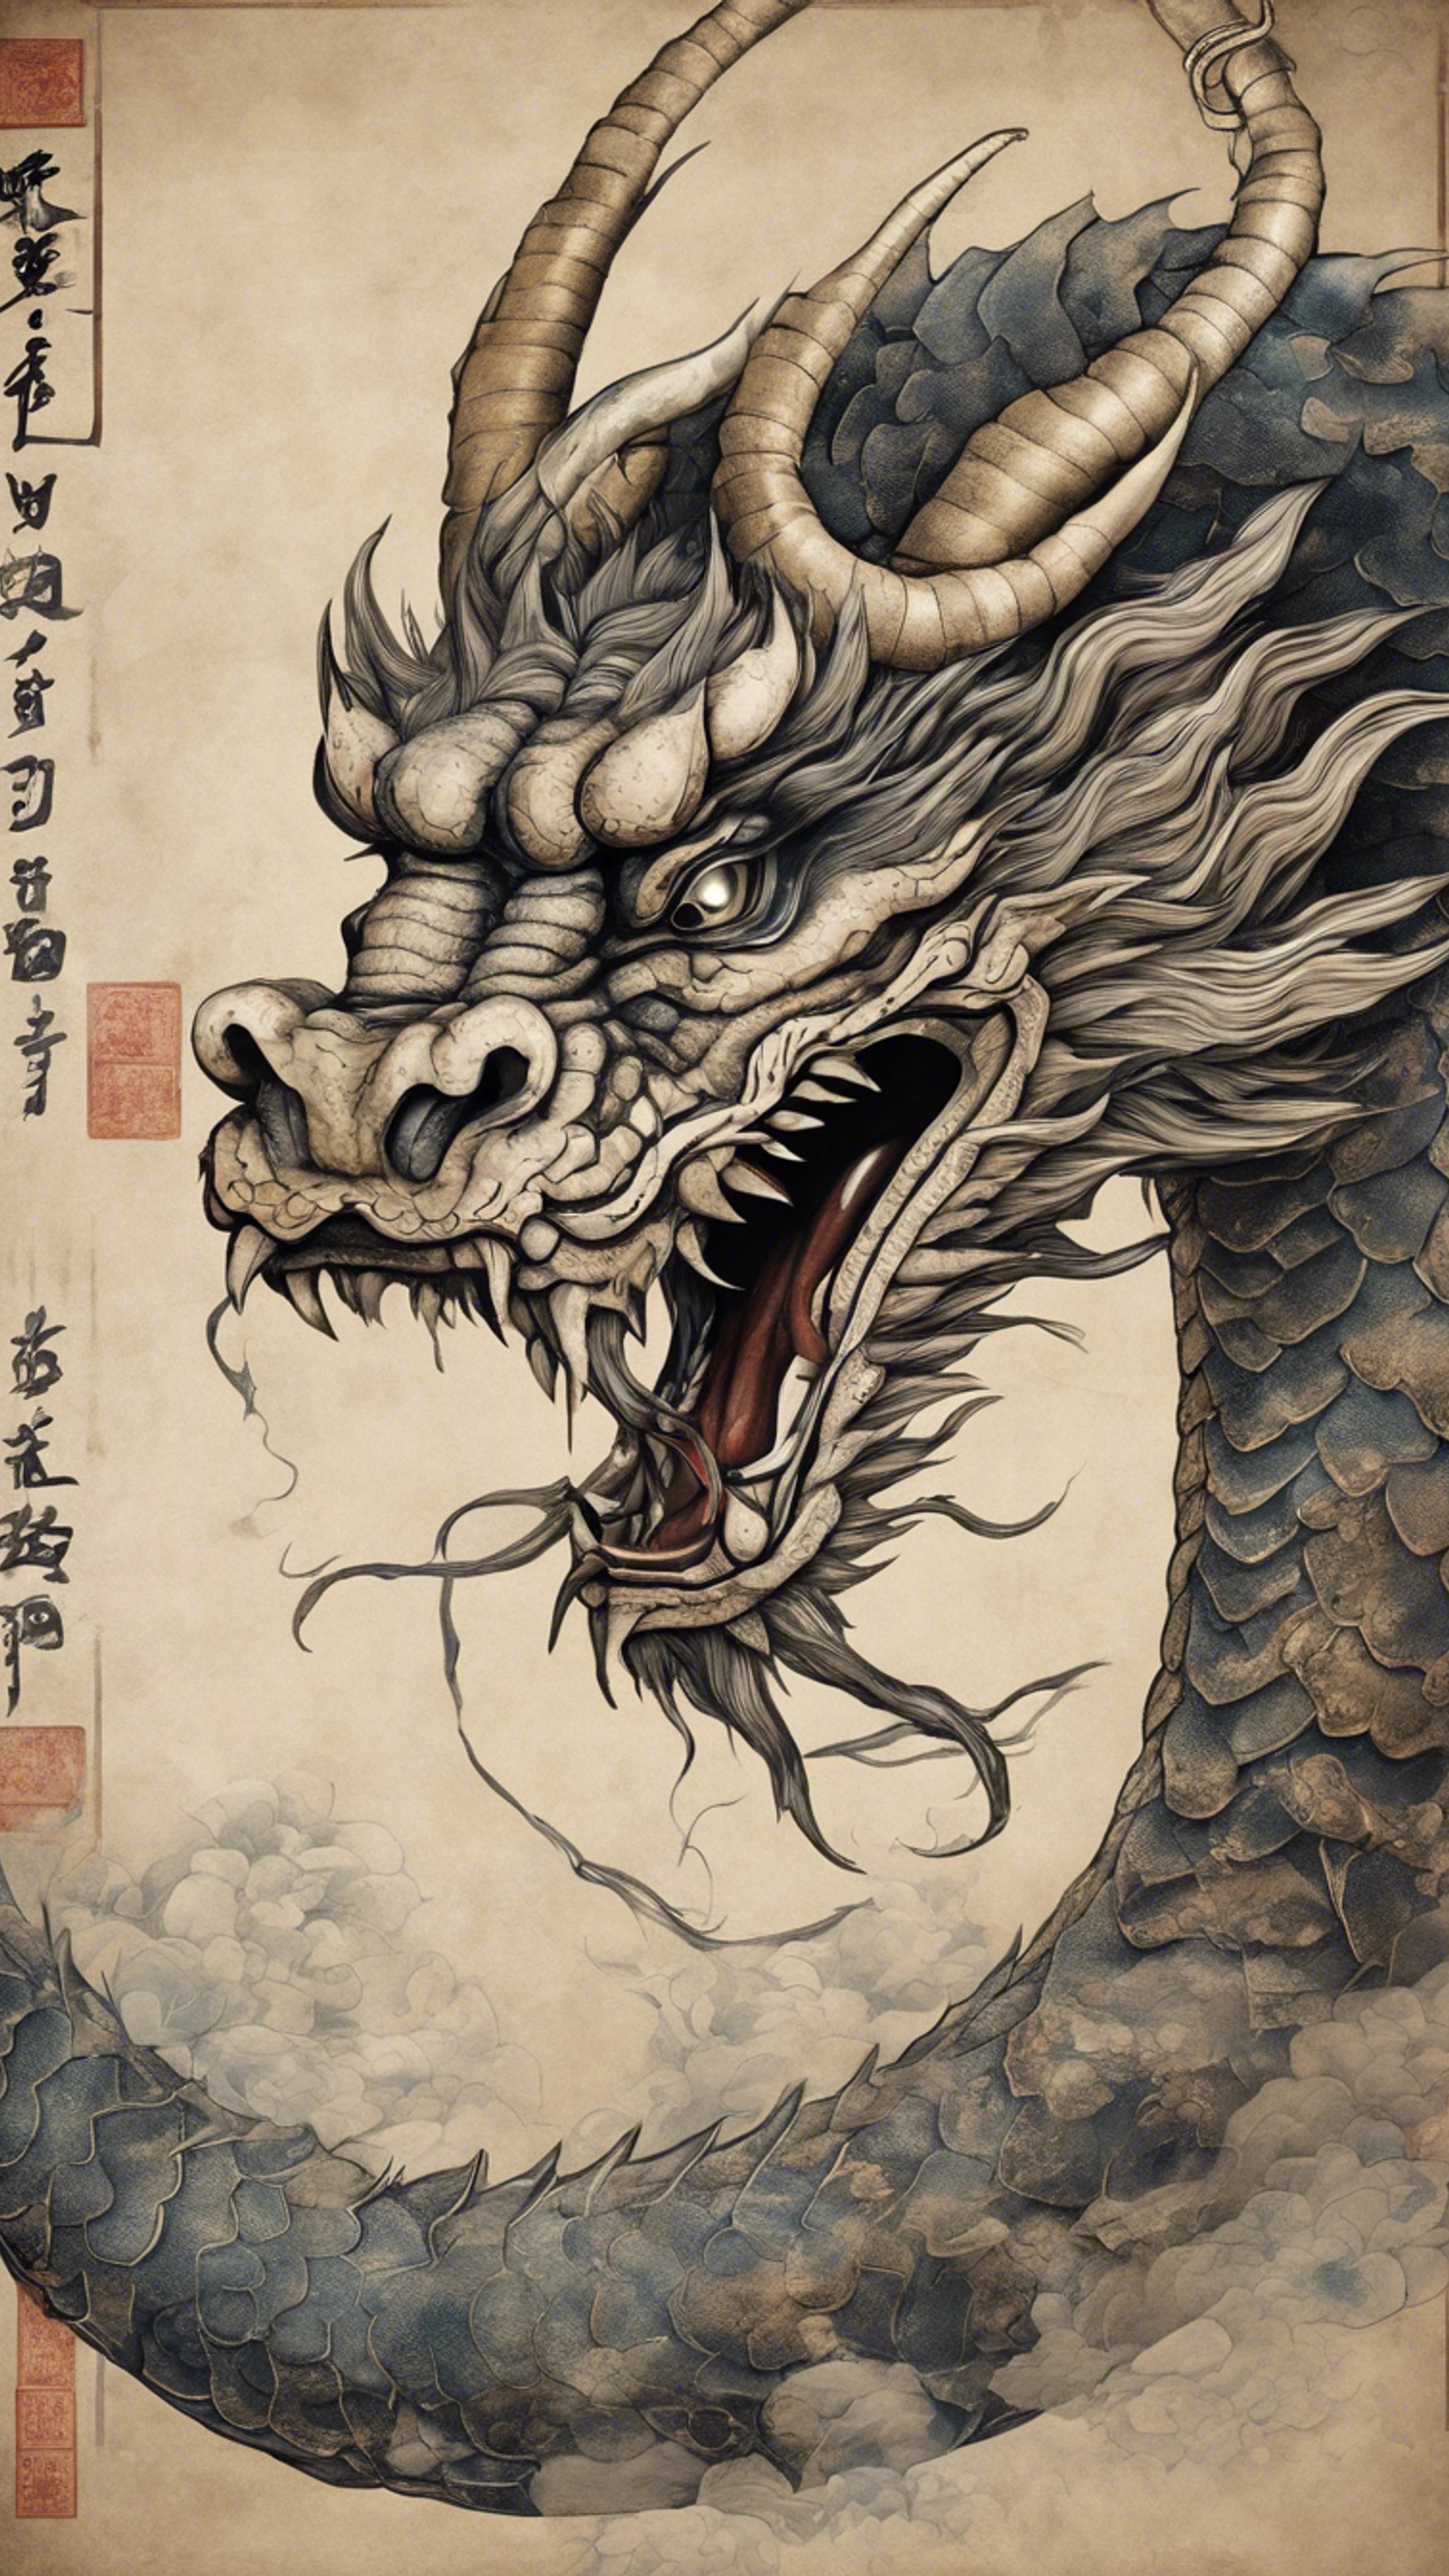 A majestic Japanese dragon illustrated in an ancient scroll. Wallpaper[ee61e4c394914154b9e3]